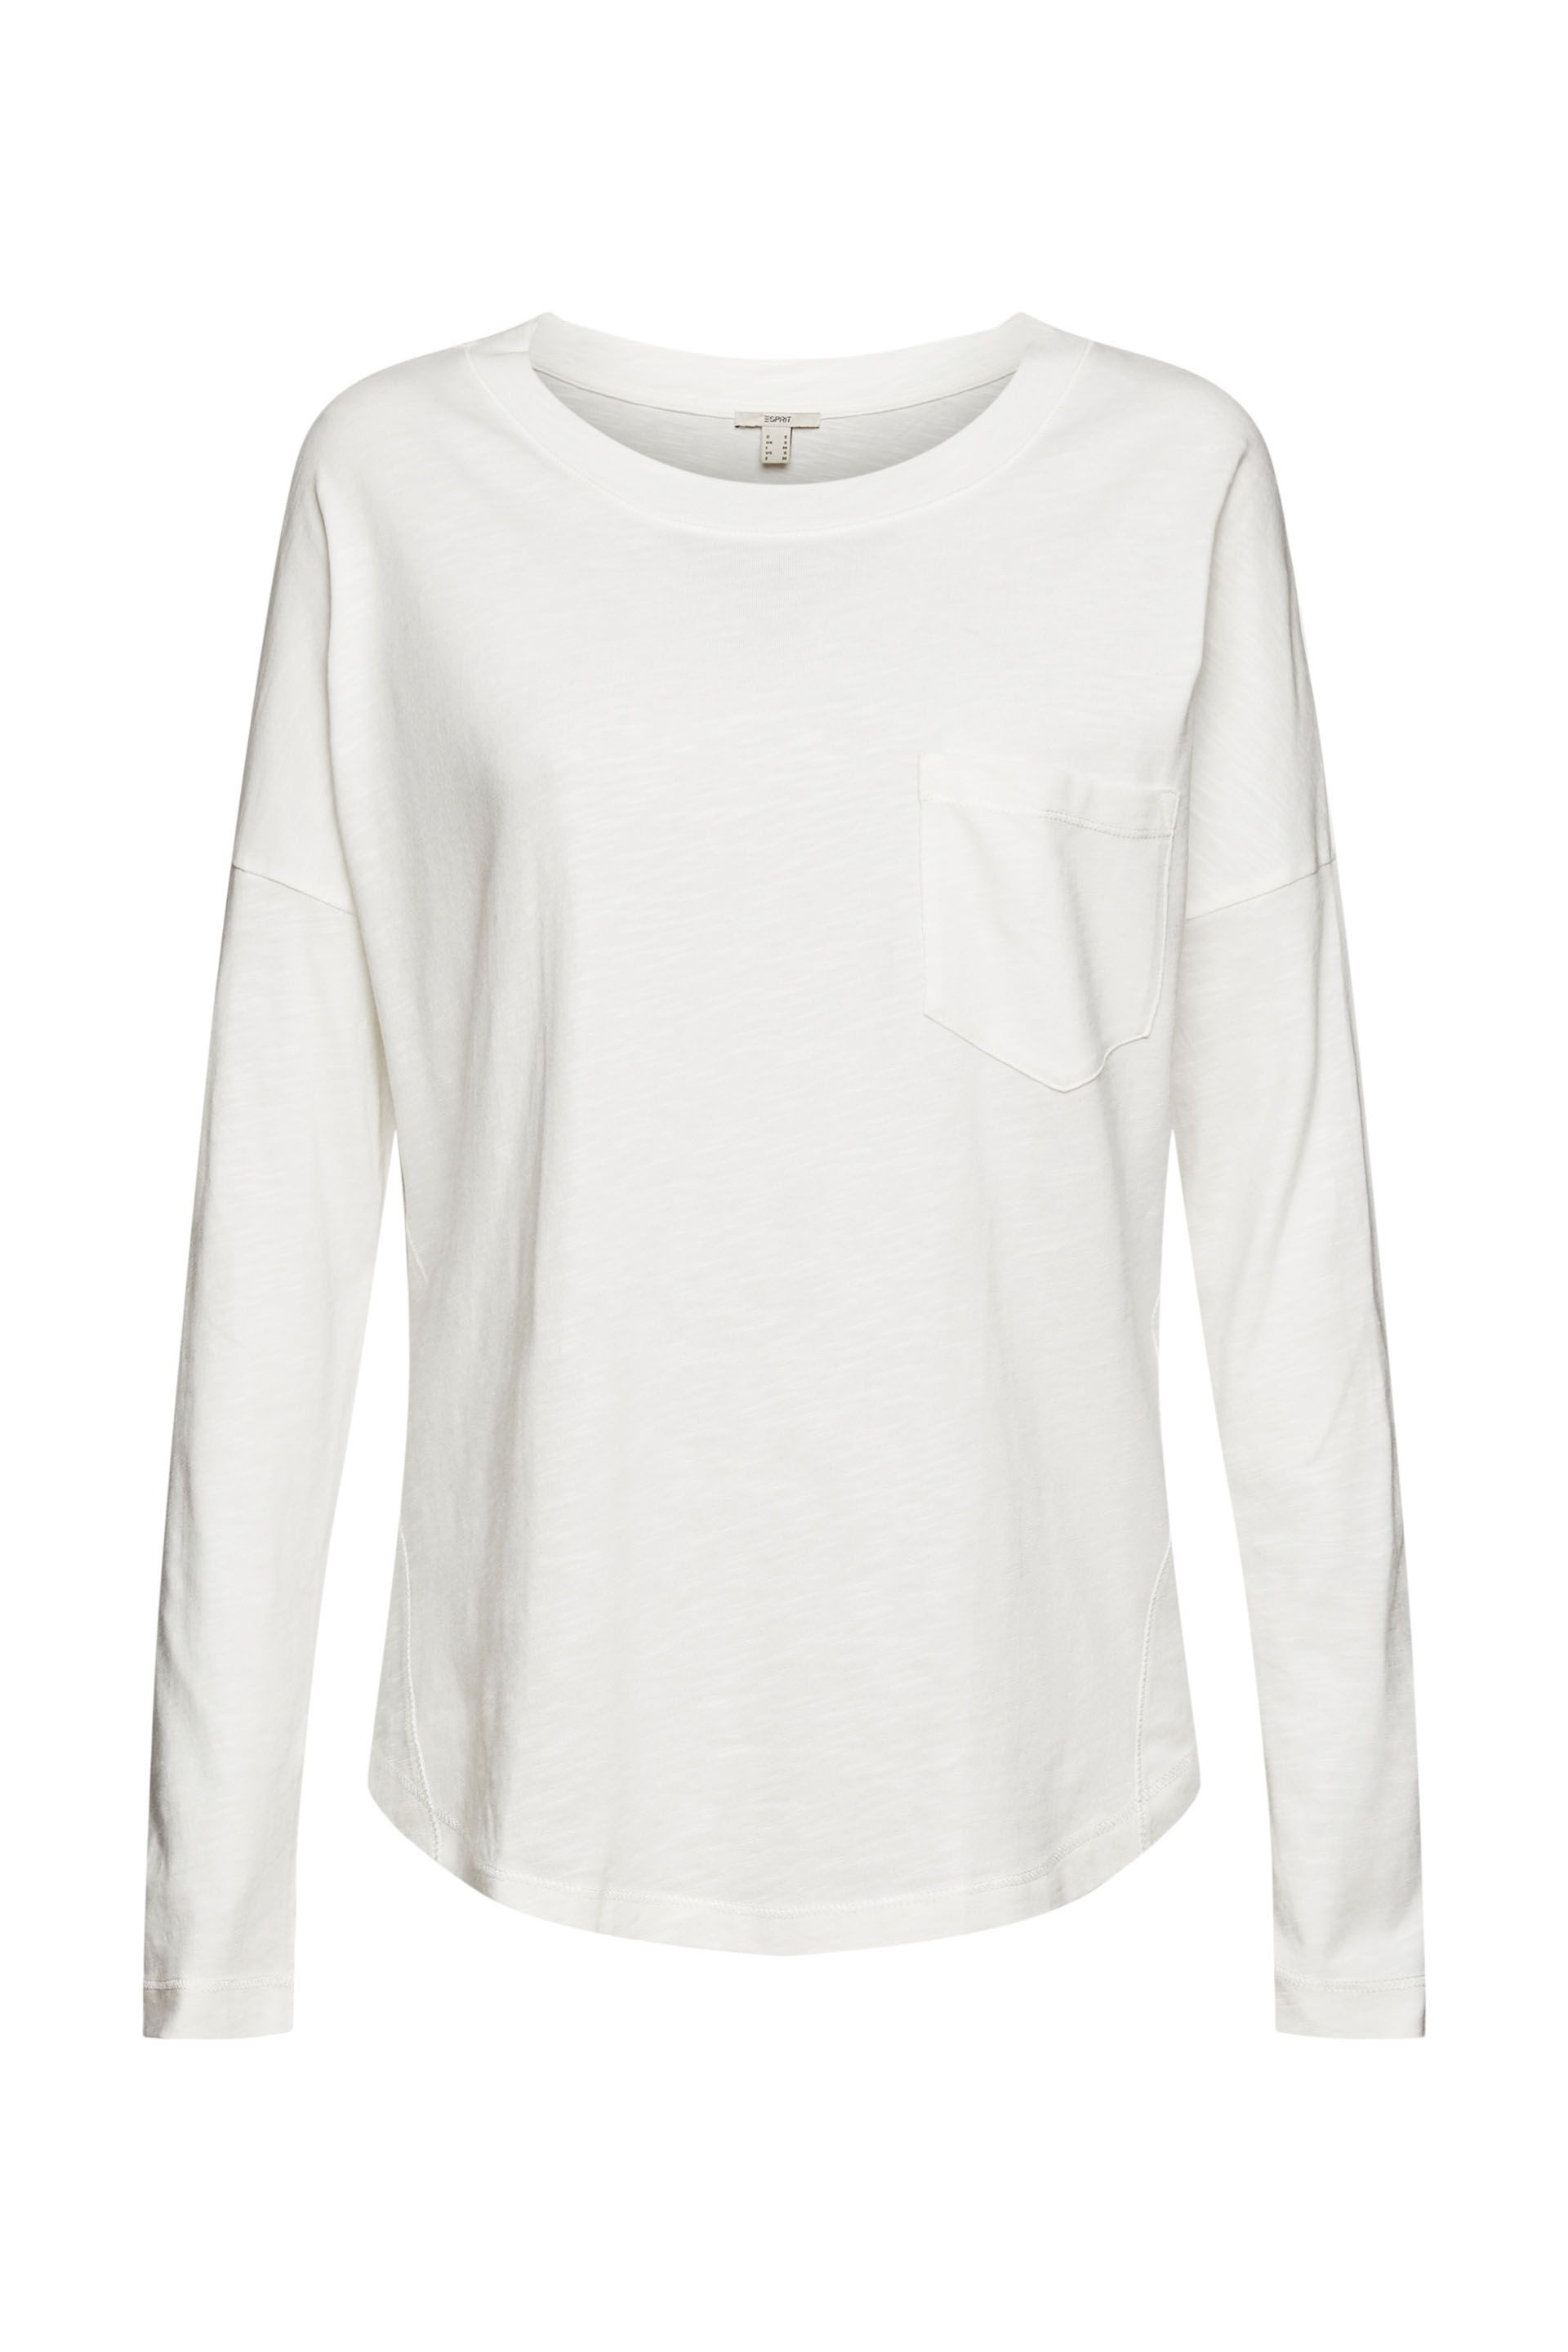 Long-sleeved T-shirt with pocket, White, large image number 0